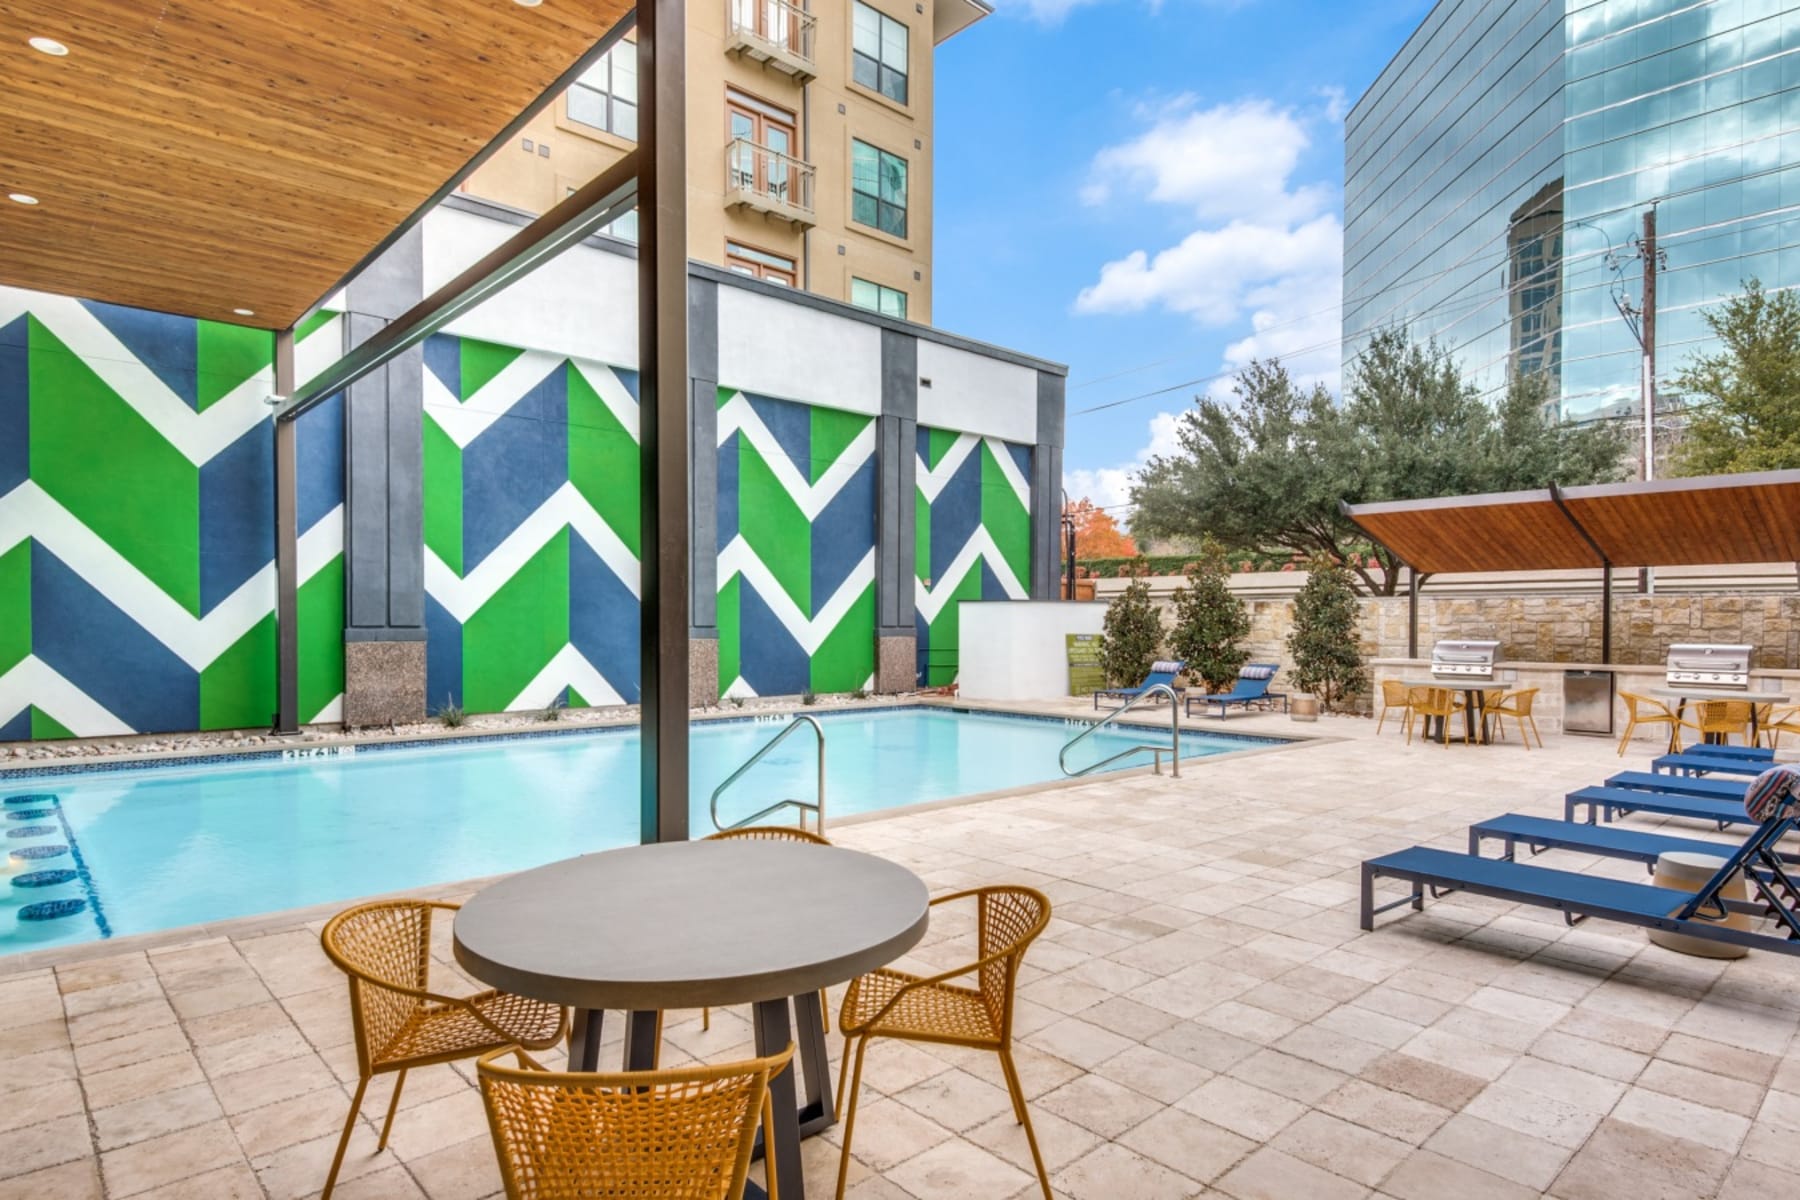 Poolside table at Cleo Luxury Apartments in Dallas, Texas